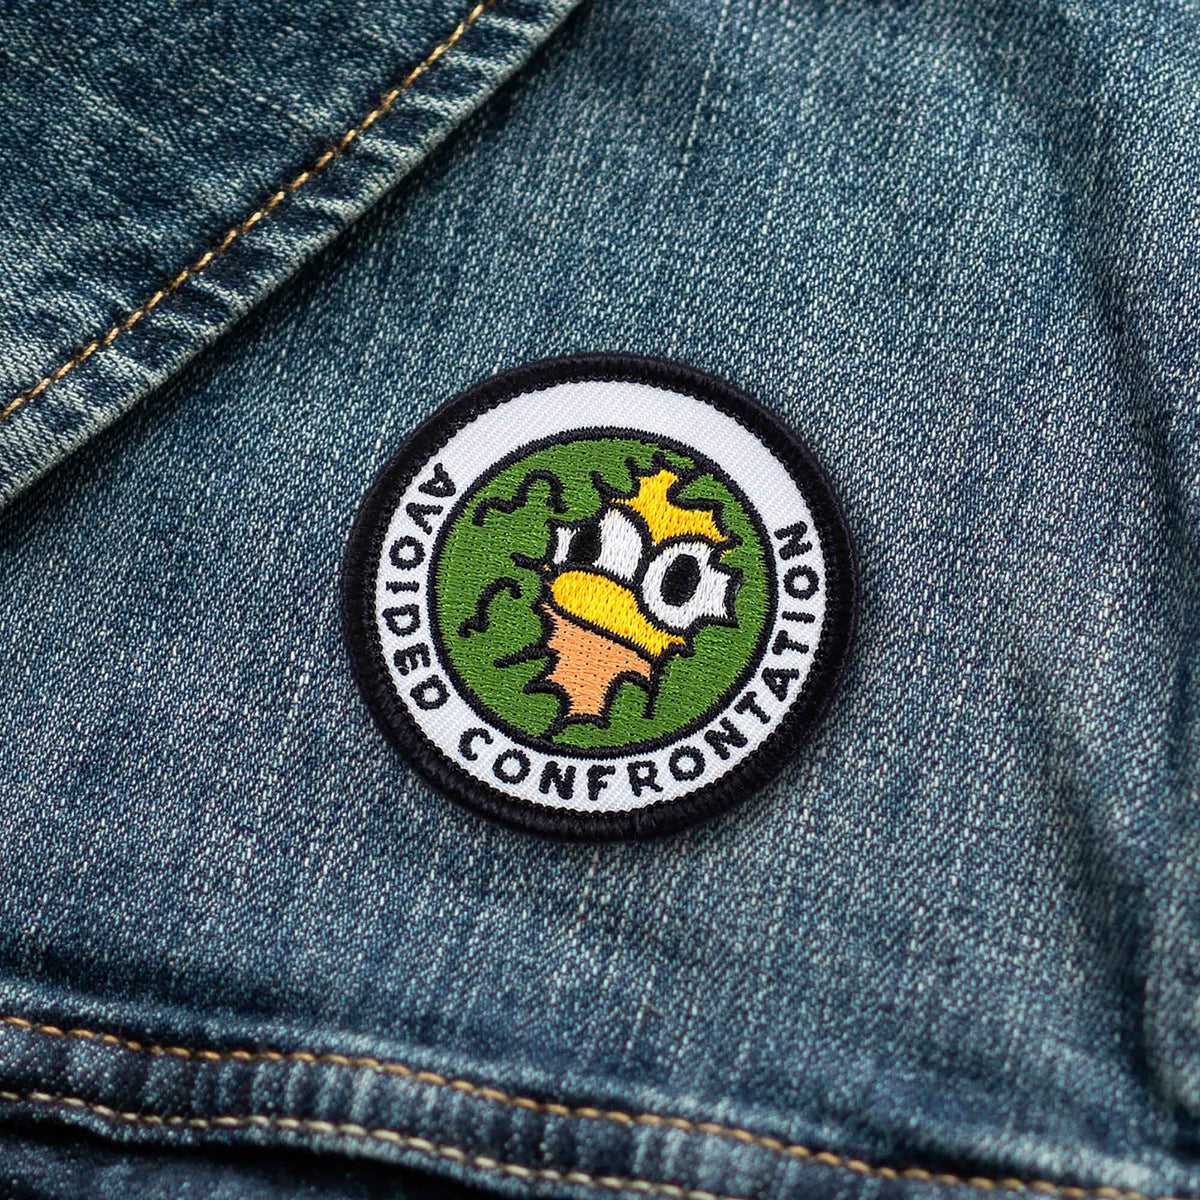 Avoided Confrontation adulting merit badge patch for adults on denim jacket